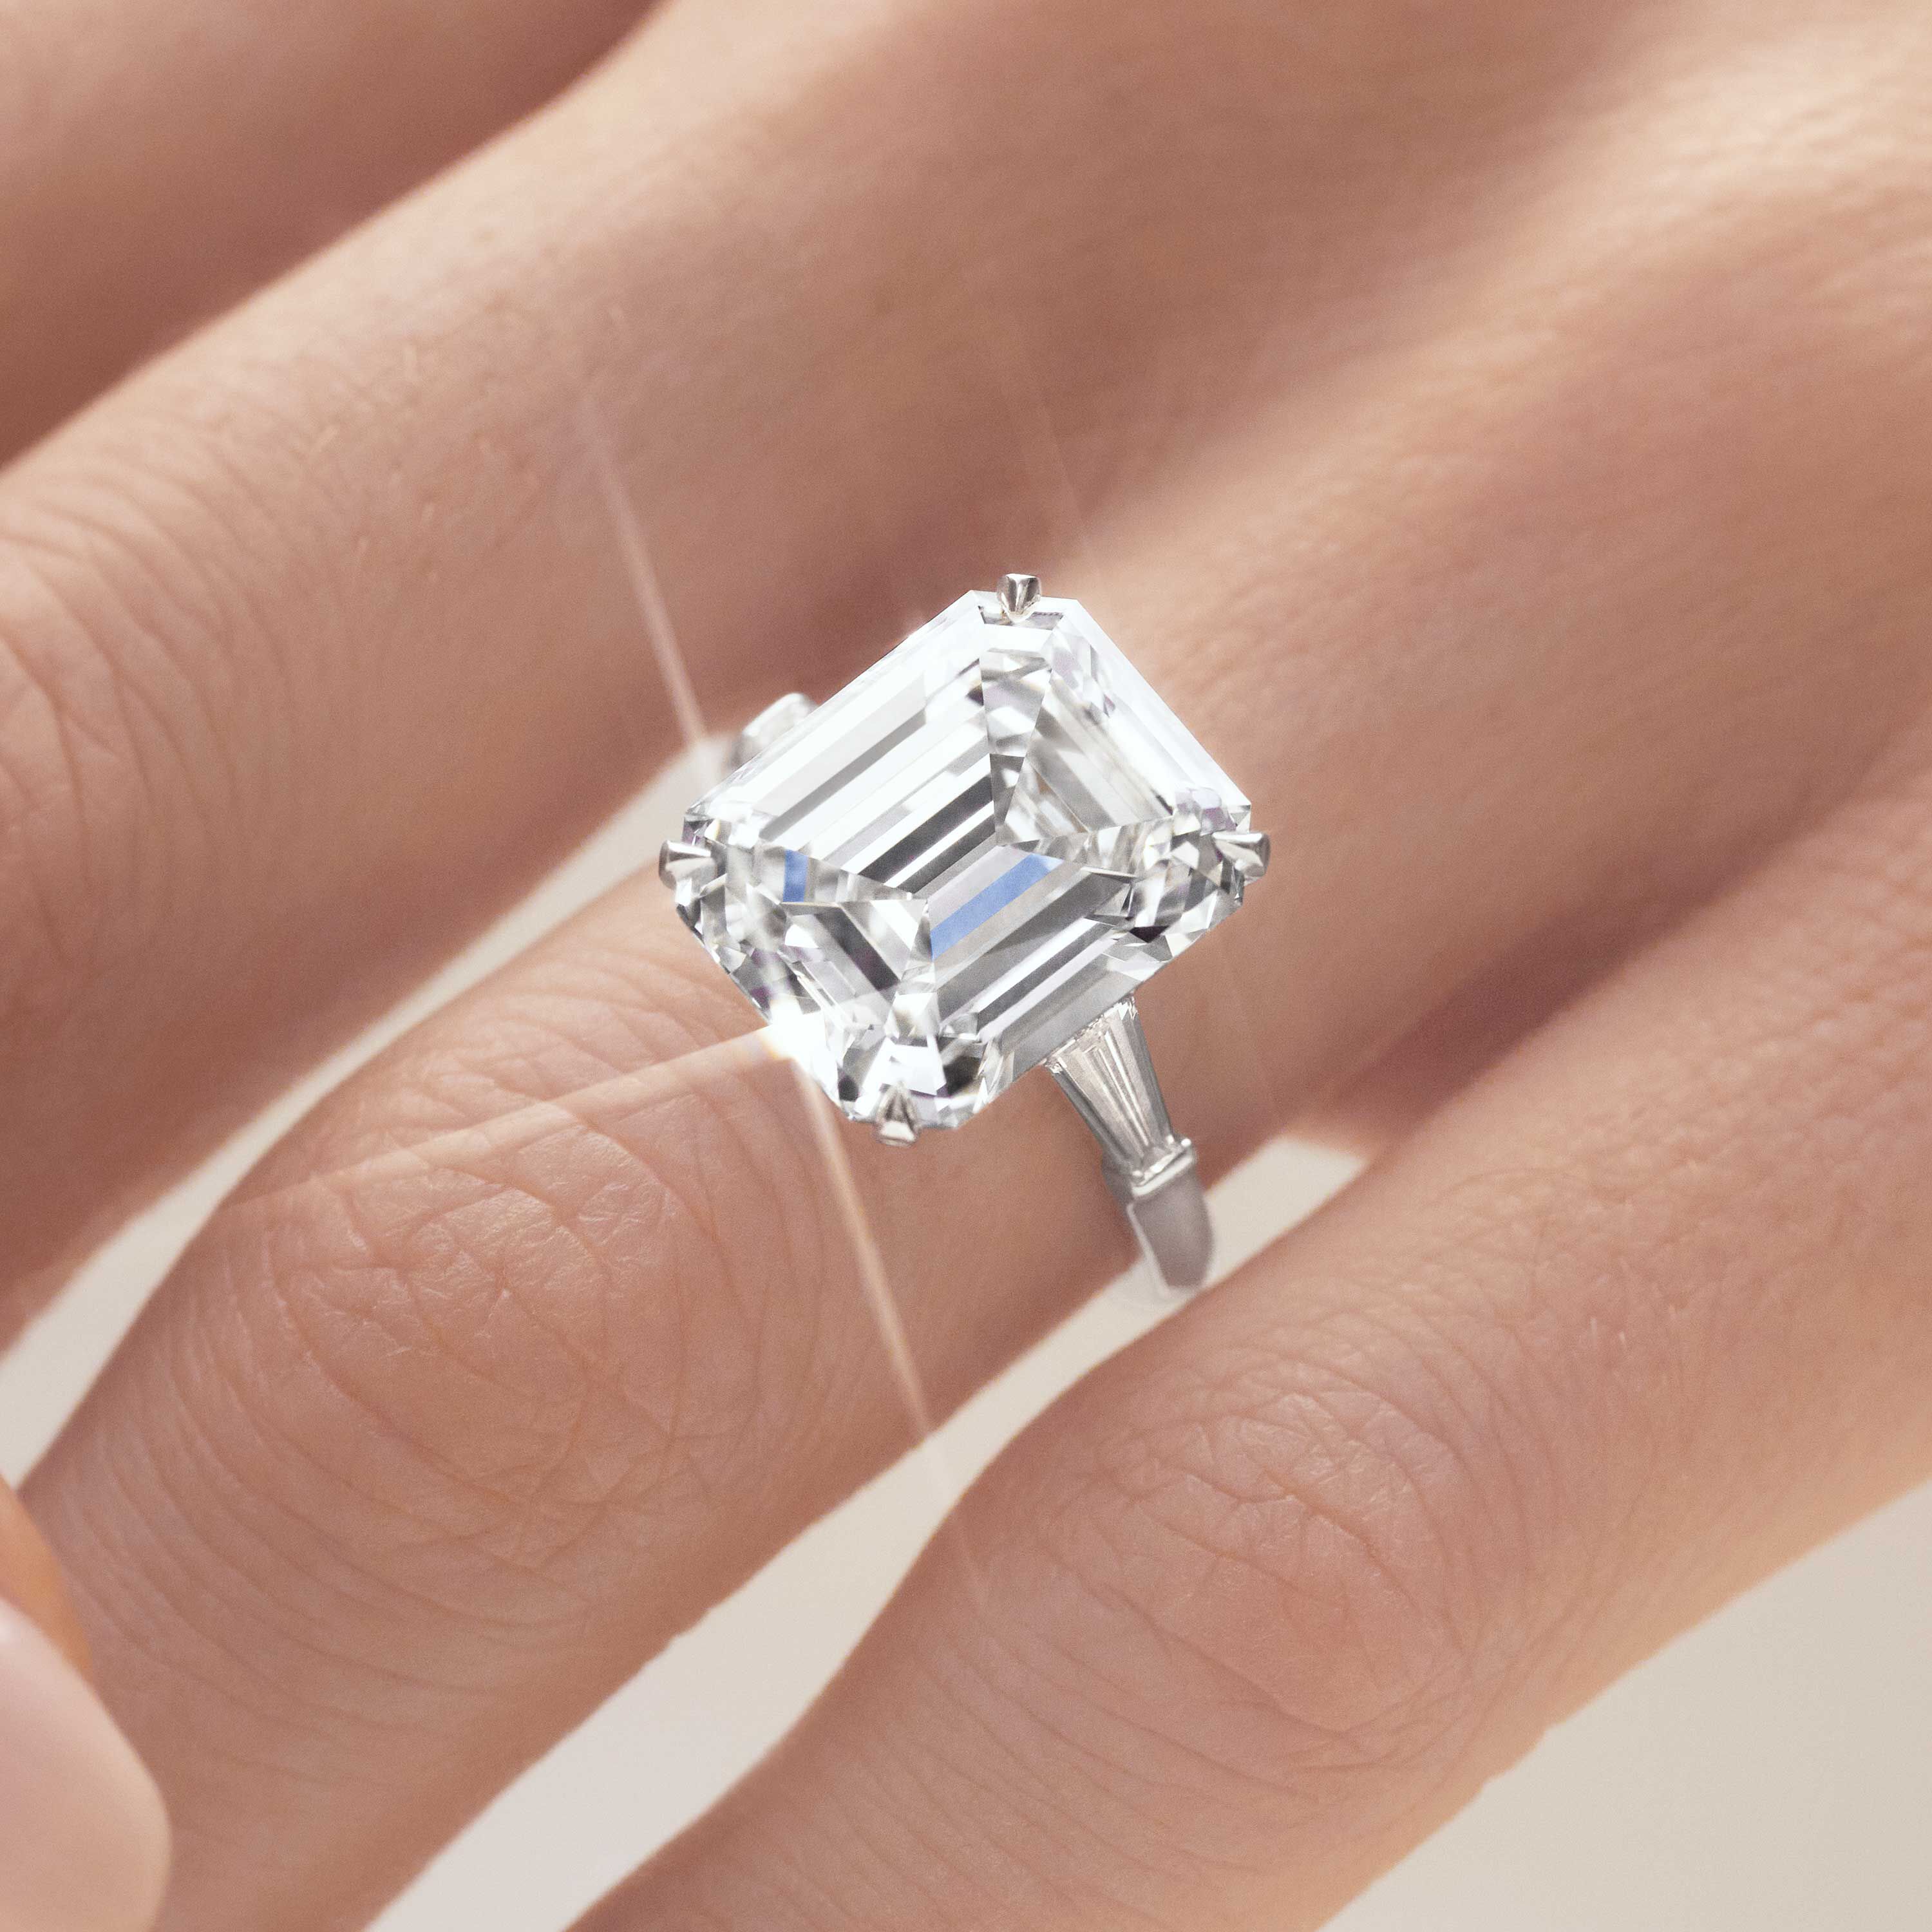 Close up of a Graff emerald cut diamond engagement ring wore by a model